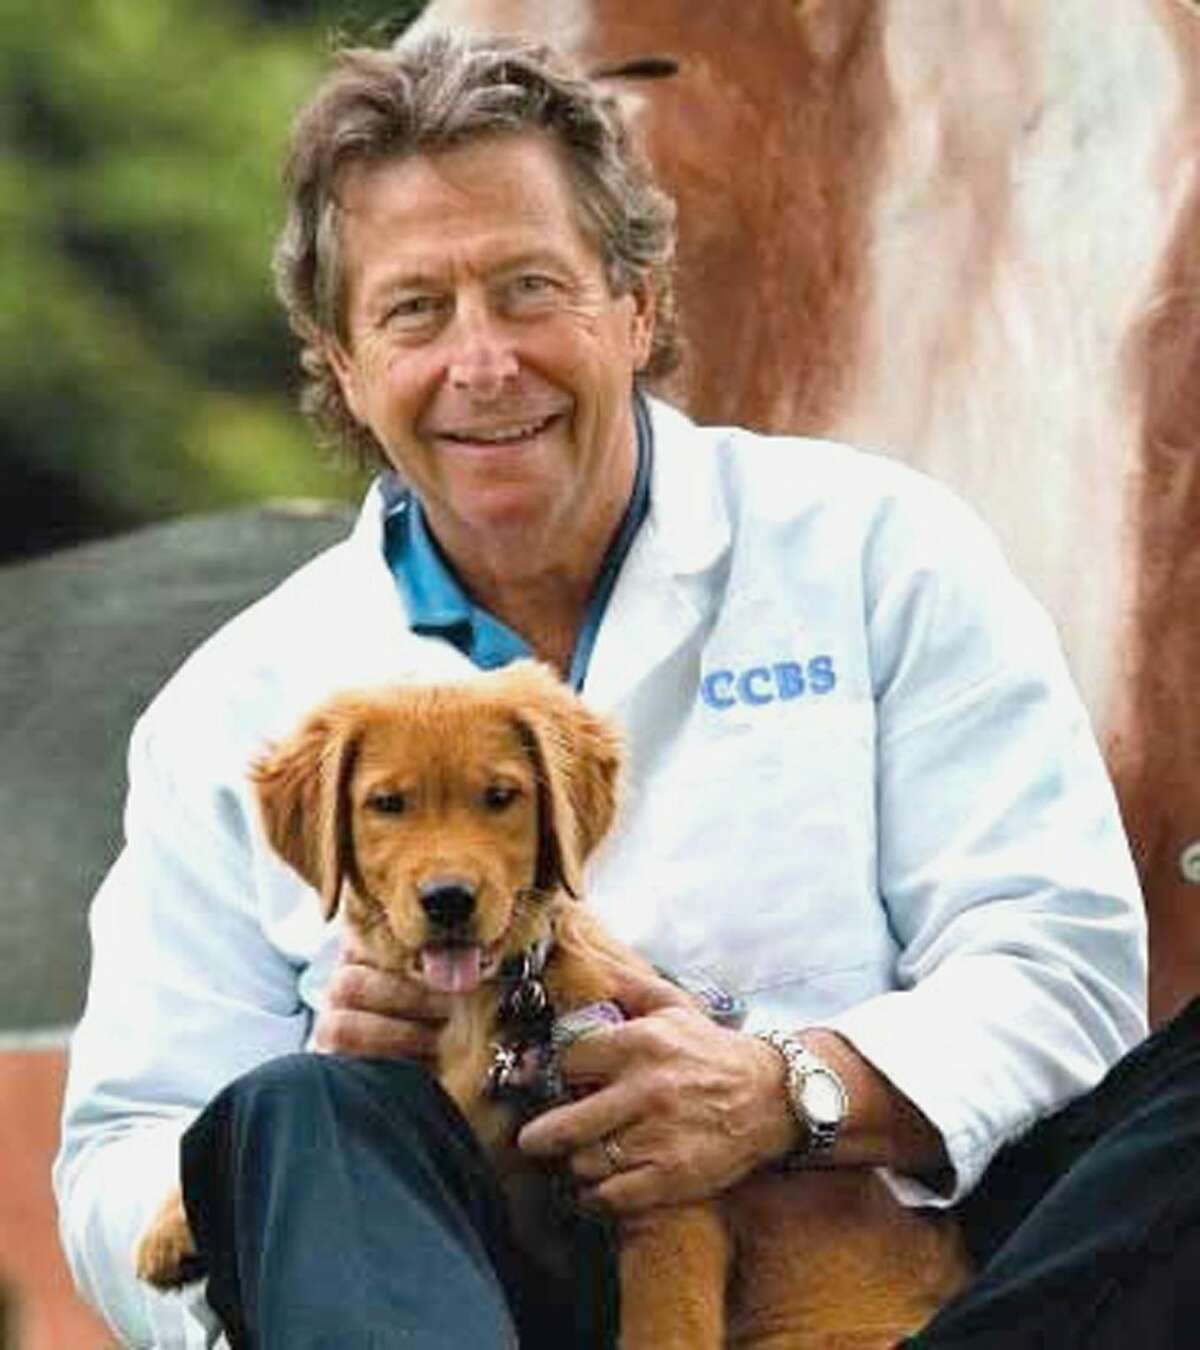 Dr. Nicholas Dodman, of the Center for Canine Research Studies, with a small friend. Dodman and his associates hope to provide a better understanding of dog behavior so that there are less surrenders to animal shelters, and happier canines and owners.